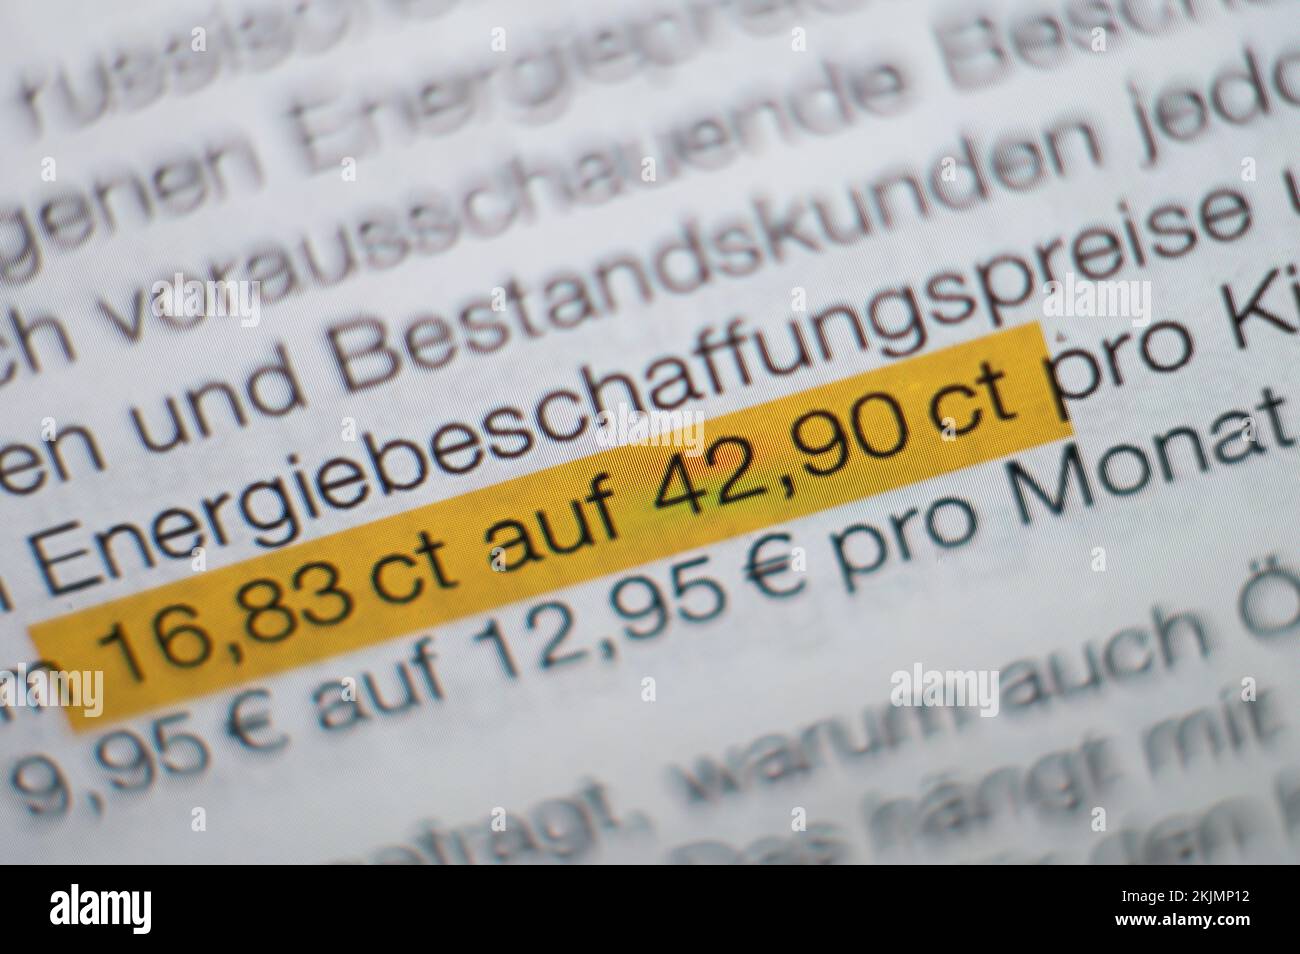 25 November 2022, Hessen, Frankfurt/Main: A notice from an energy supplier states an increase of '16.83 ct to 42.90 ct' per kilowatt hour. Many electricity suppliers are increasing prices from January. Photo: Sebastian Gollnow/dpa Stock Photo